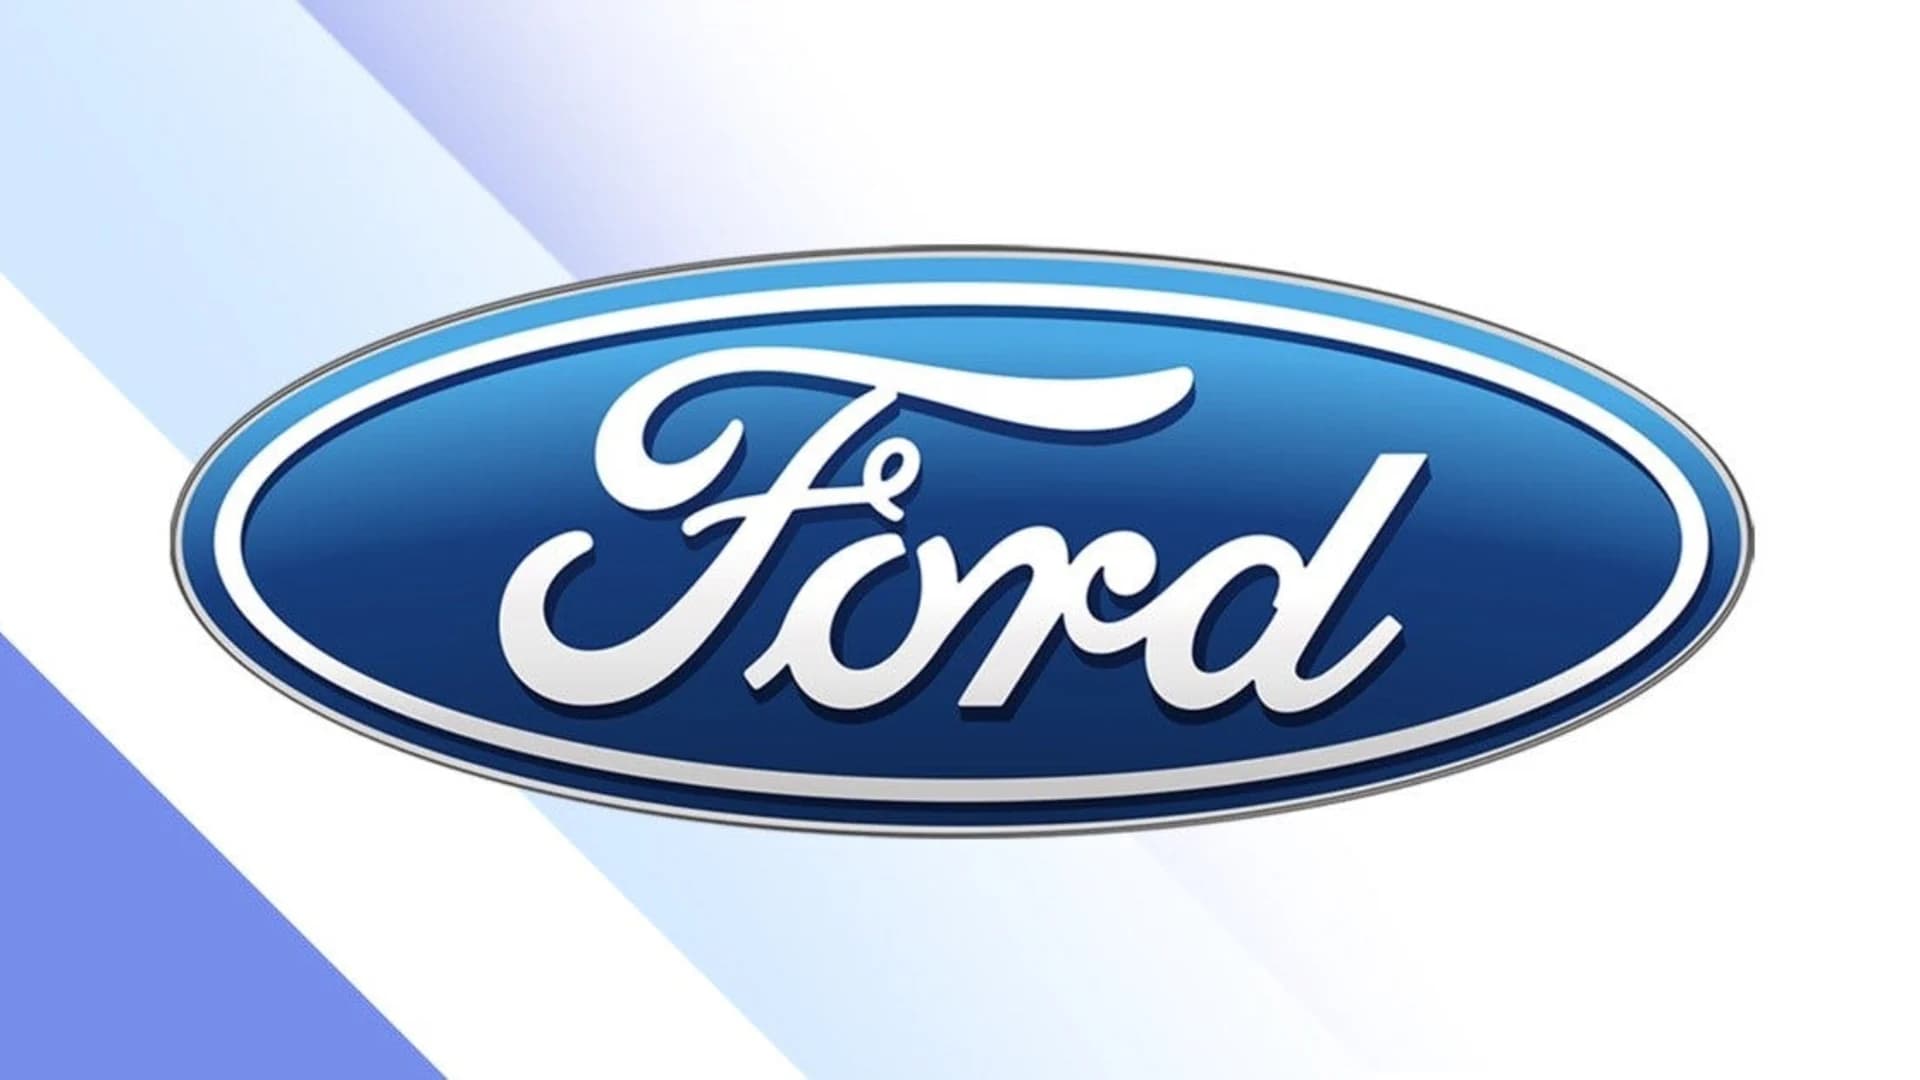 Ford recalls 600,000 midsize cars in US to fix brake problem